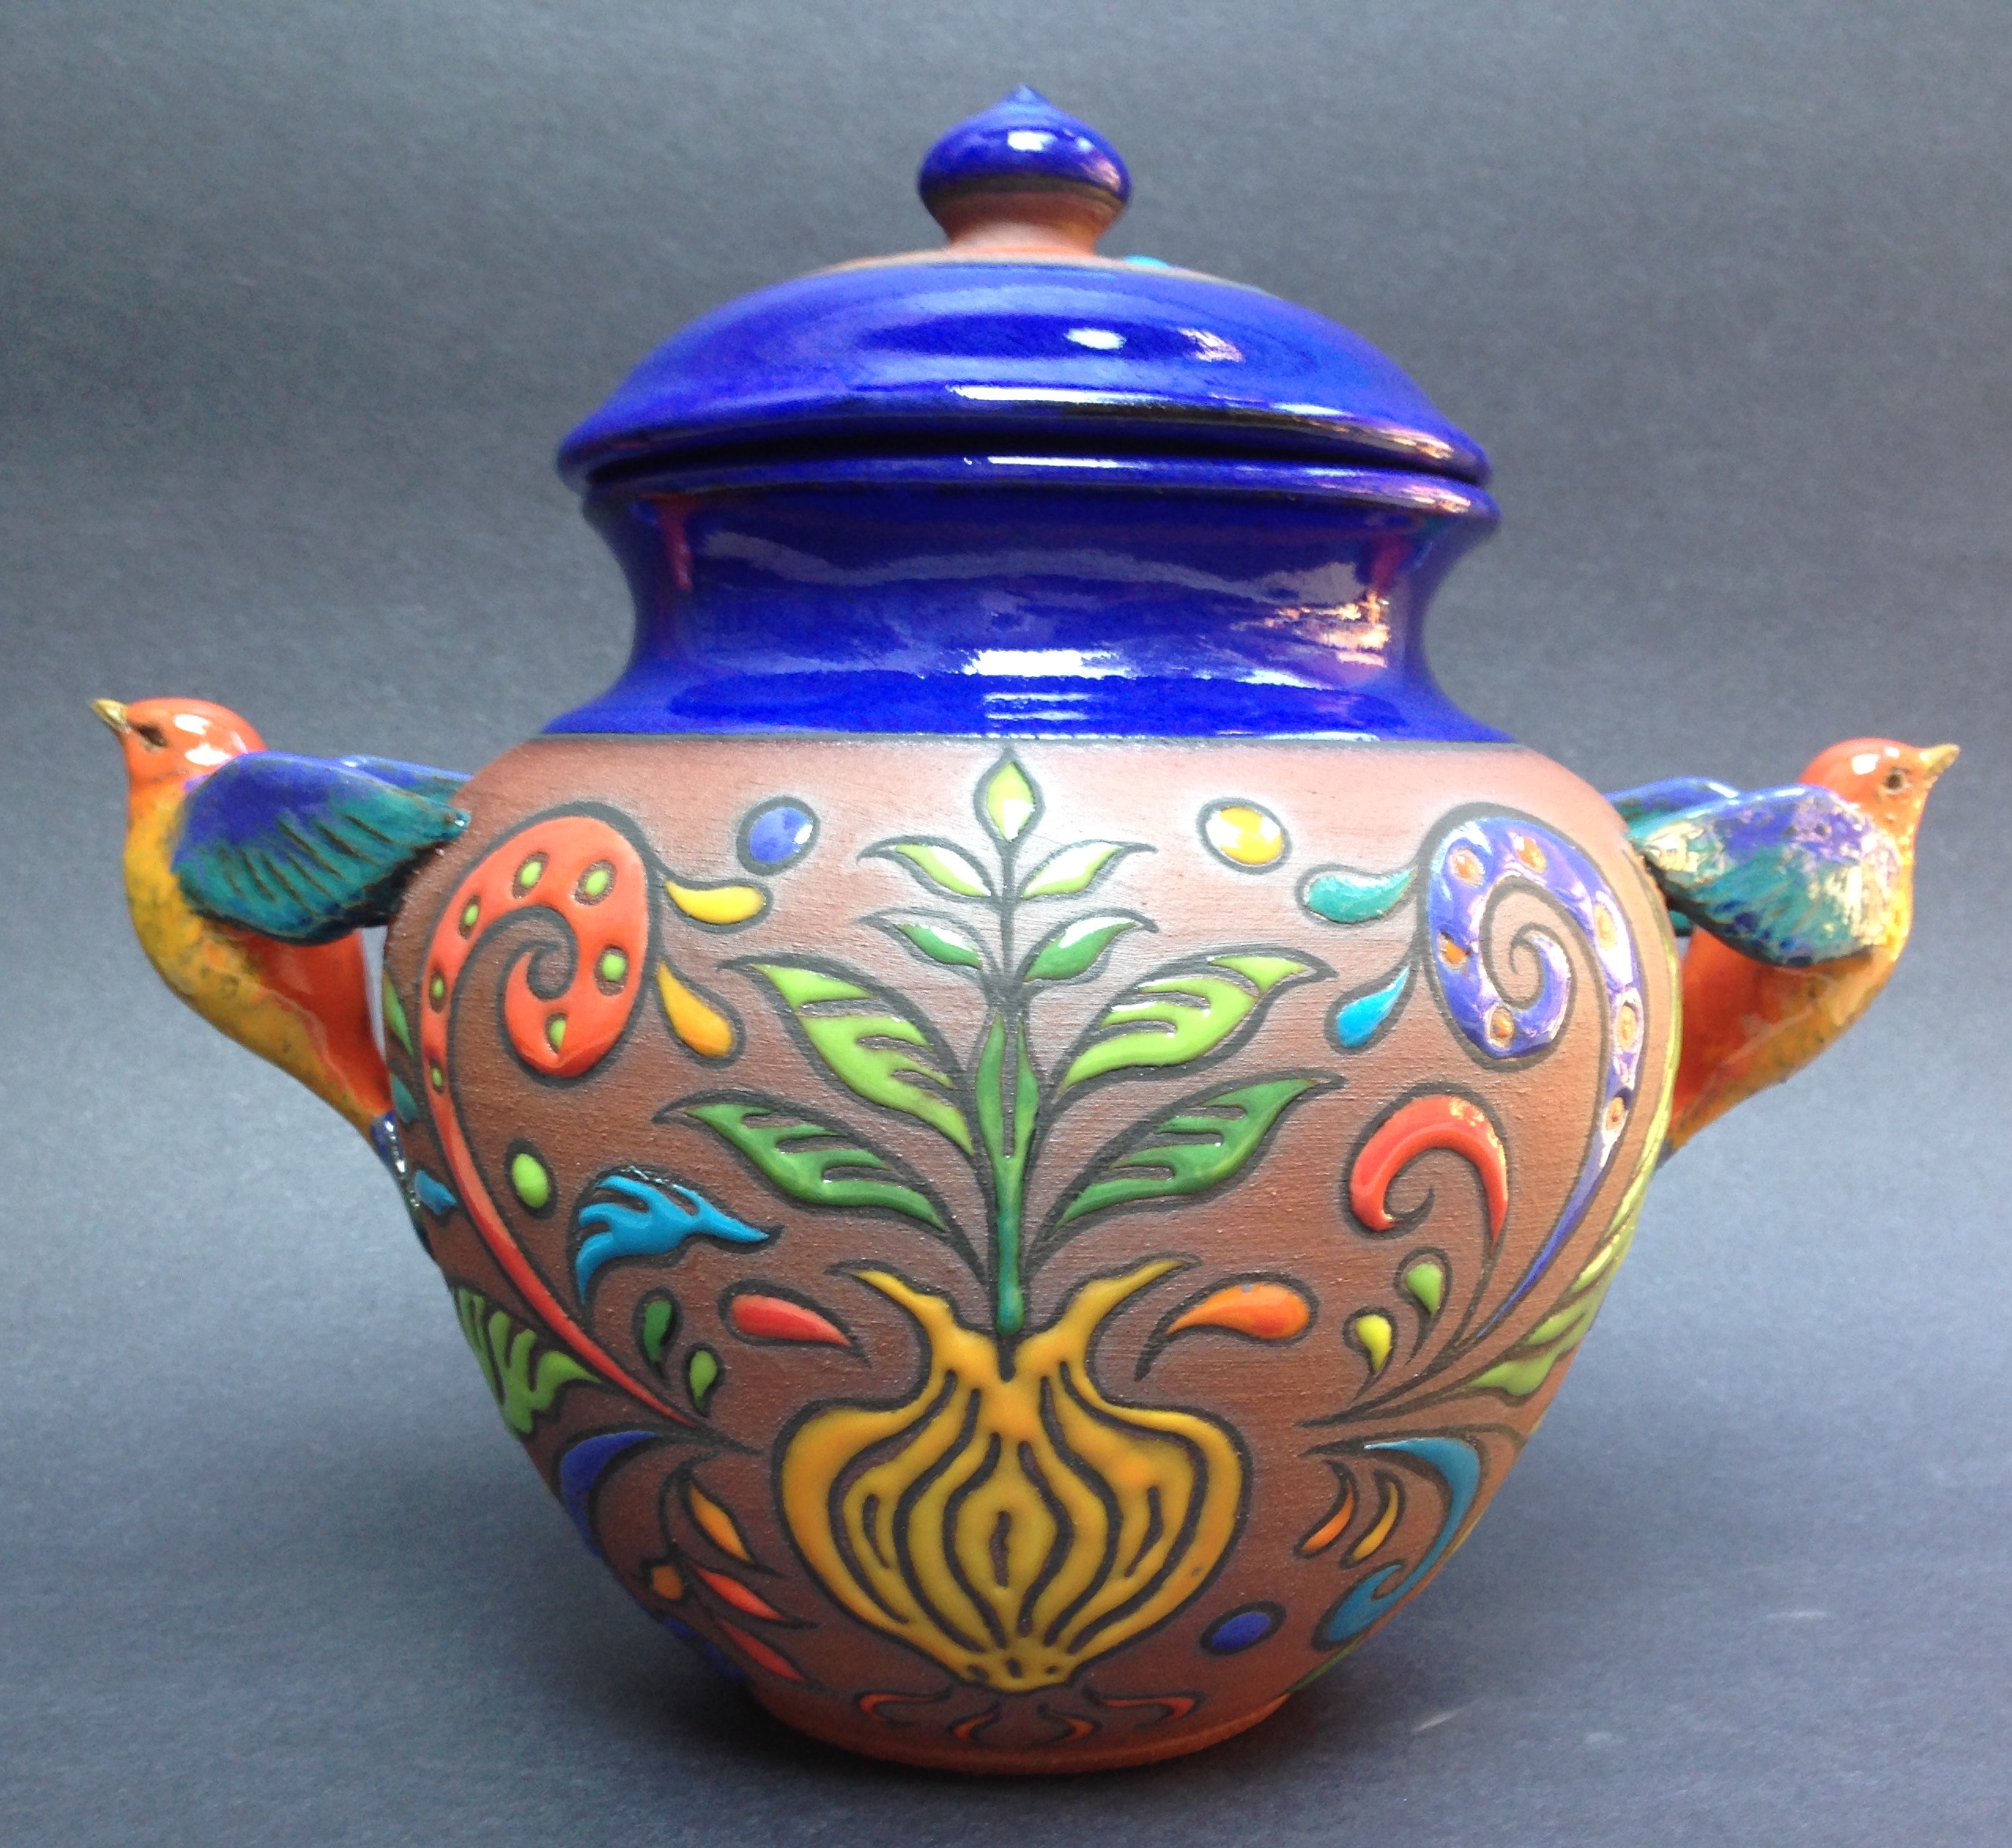 Colorful Ashes Urn with Sculpted Bird Handles